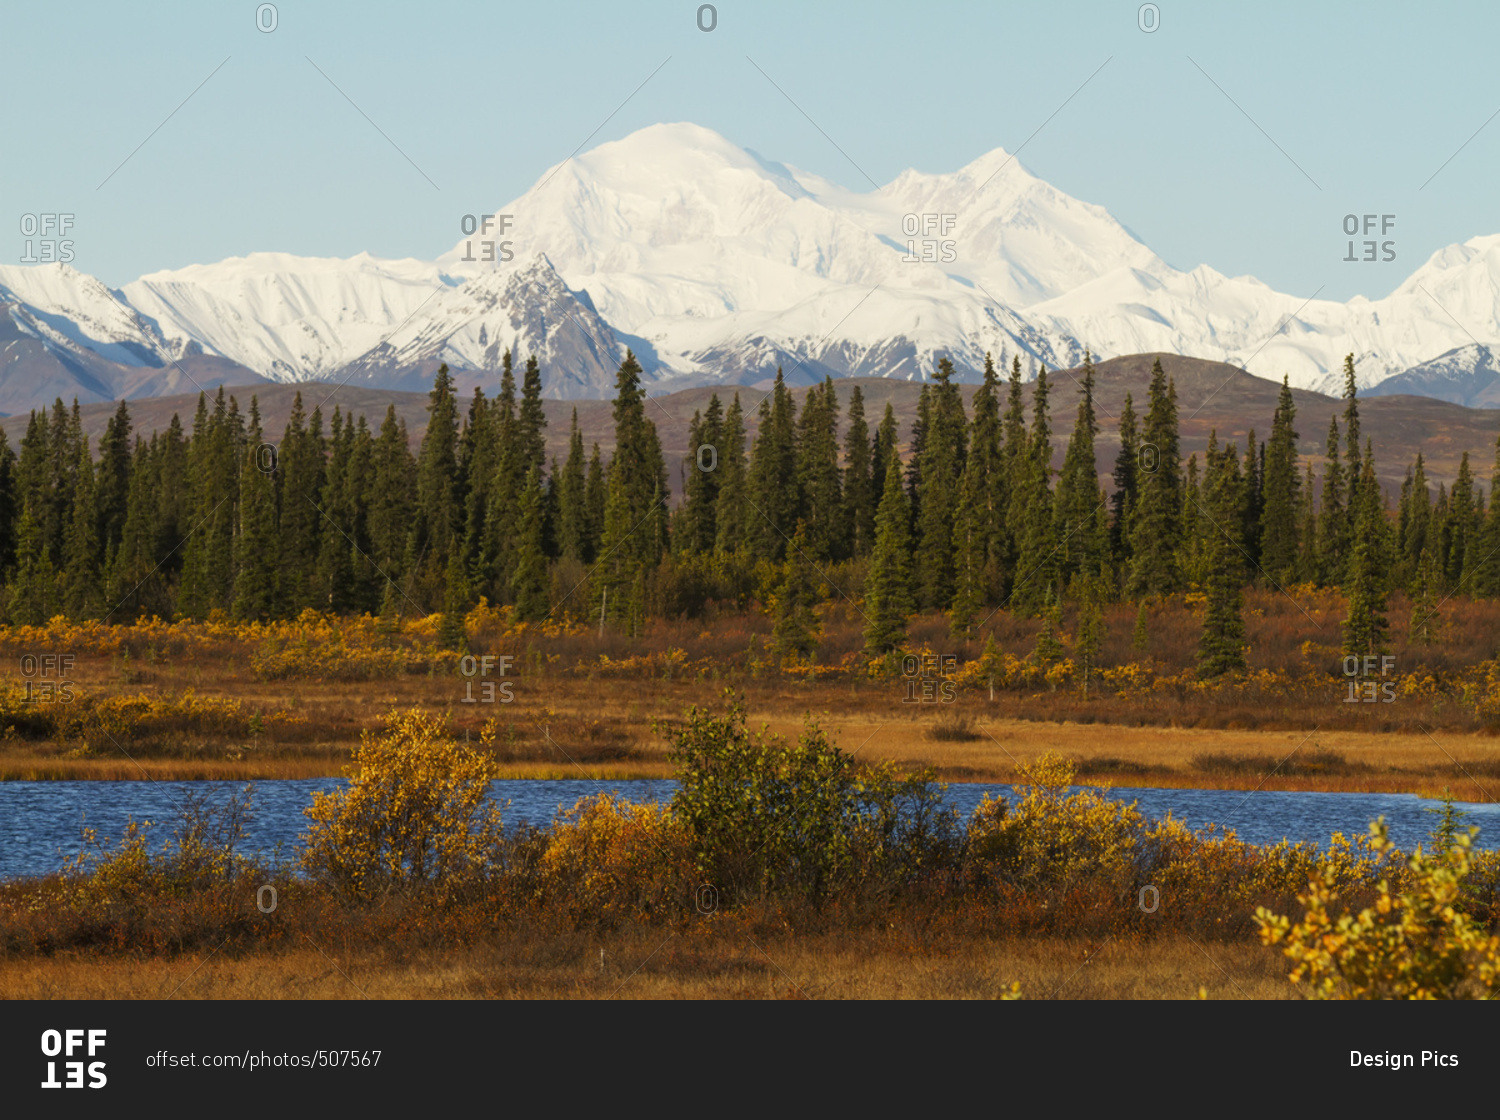 Denali towers over a small pond and spruce trees in interior Alaska in autumn, view from the Parks Highway south of Cantwell; Alaska, United States of America